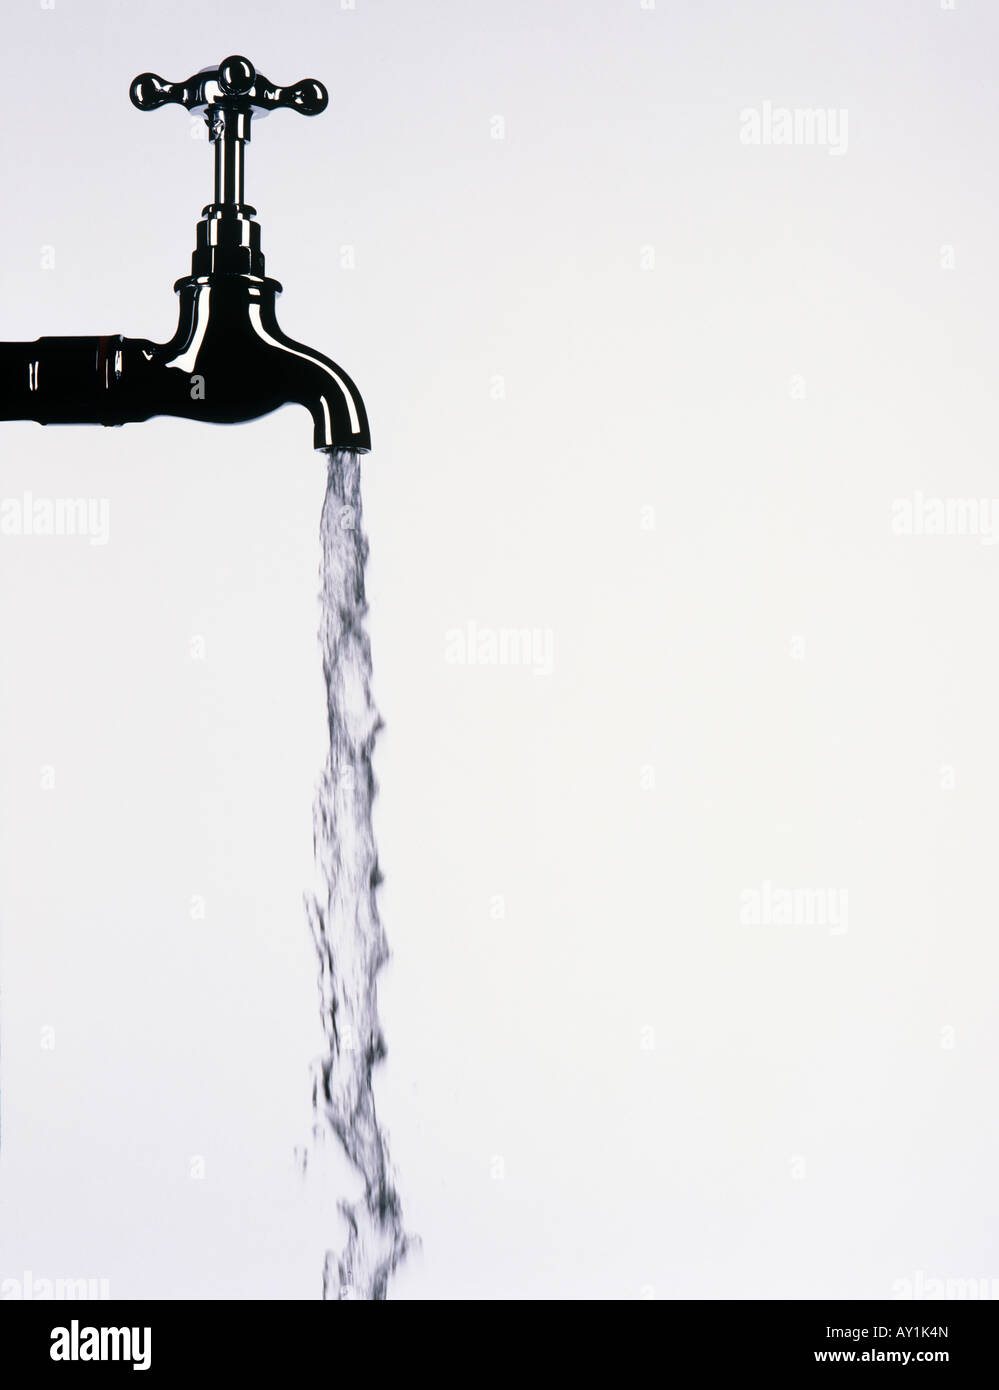 Tap with water flowing from it Stock Photo